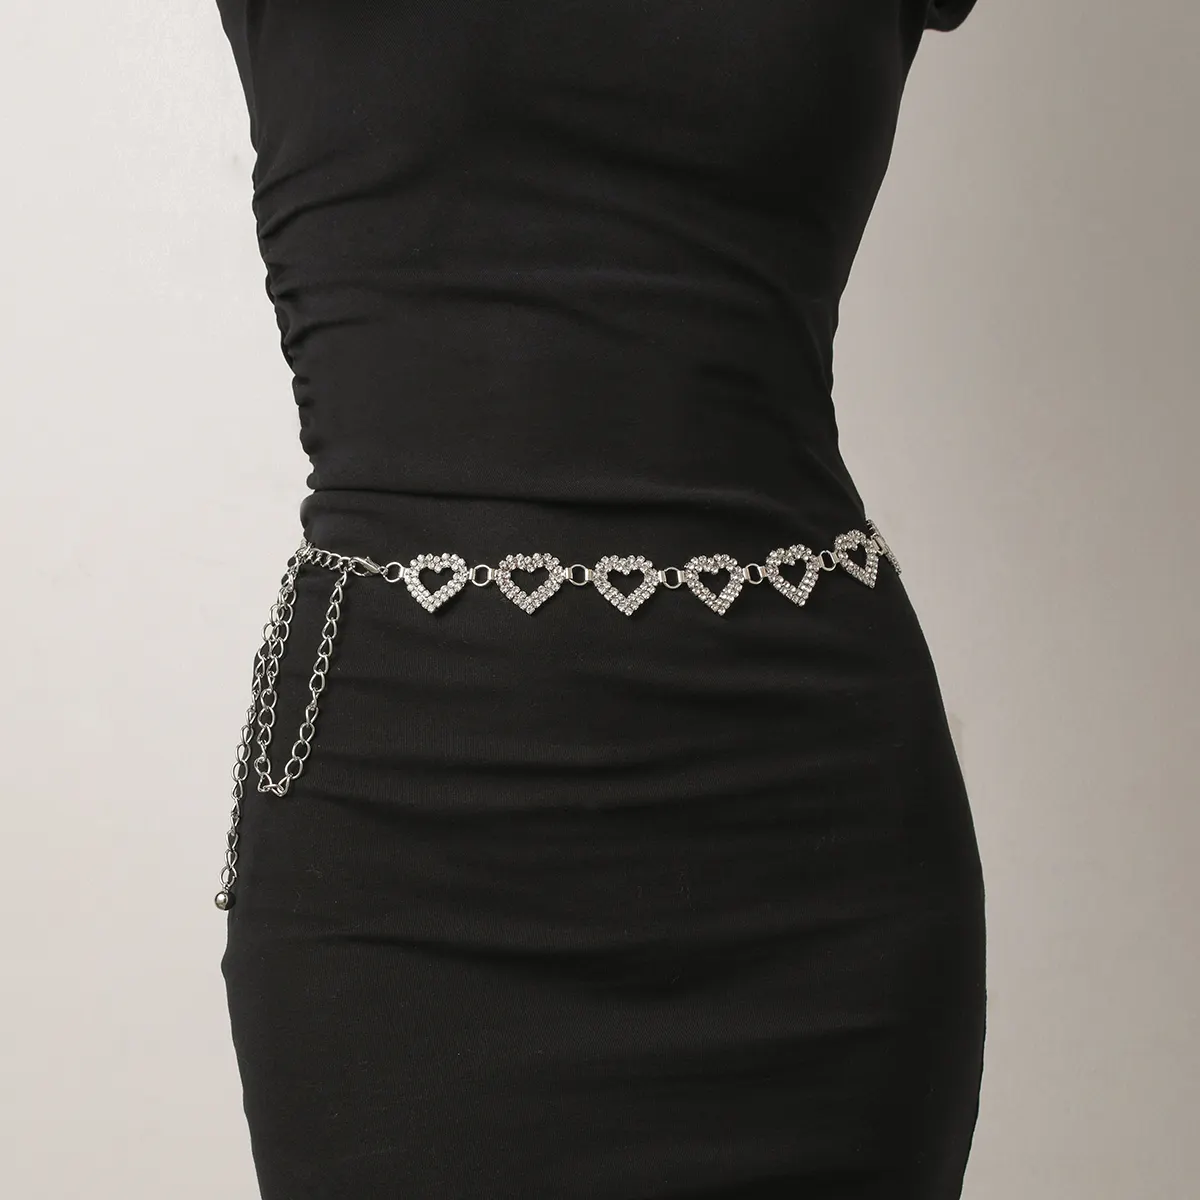 Hot Selling Strass Hart Buik Taille Ketting Vrouwen Sexy Punk Nachtclub Rock Multi-Layer Body Chain